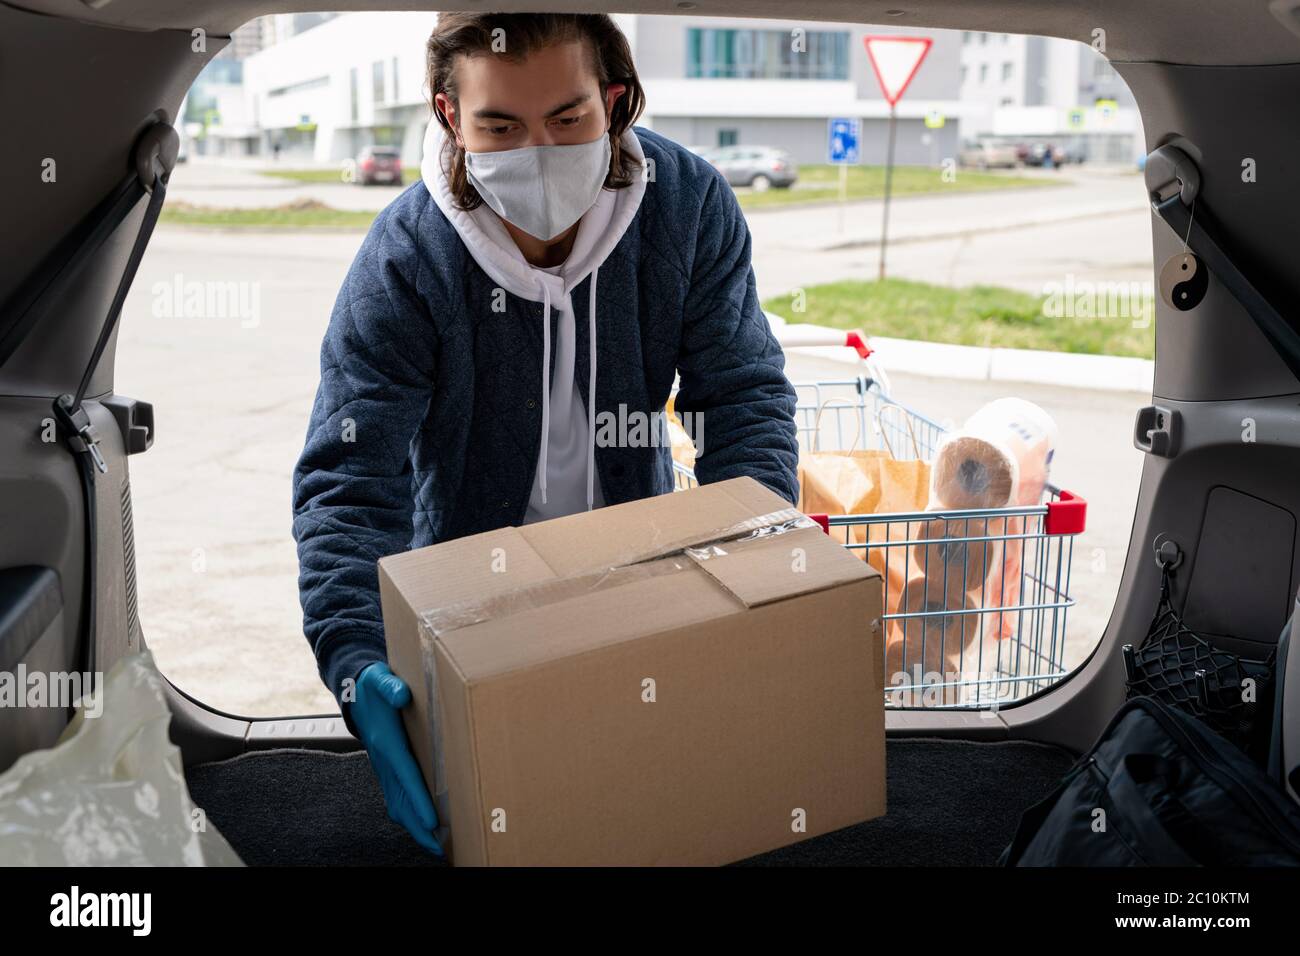 Middle-aged man in cloth mask and jacket standing at car and loading box into trunk after visiting store Stock Photo